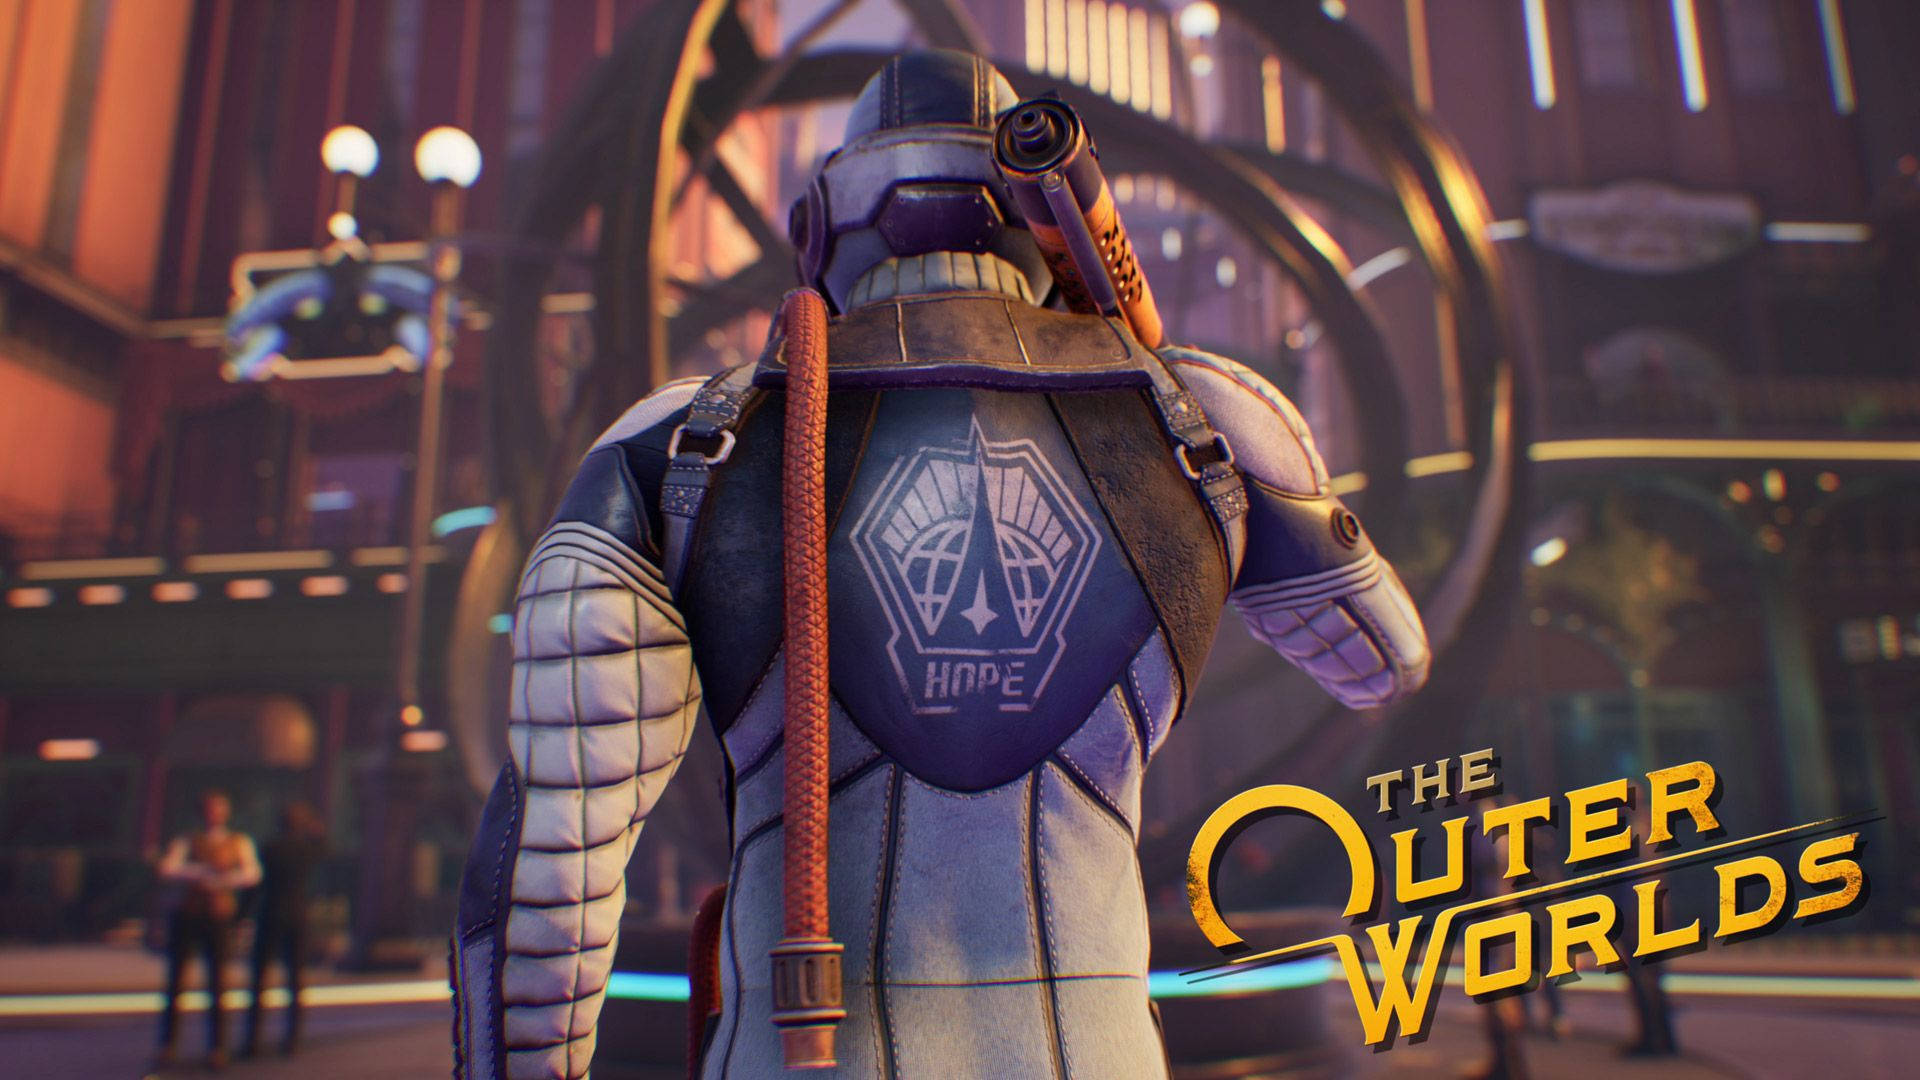 The Outer Worlds The Hope Background